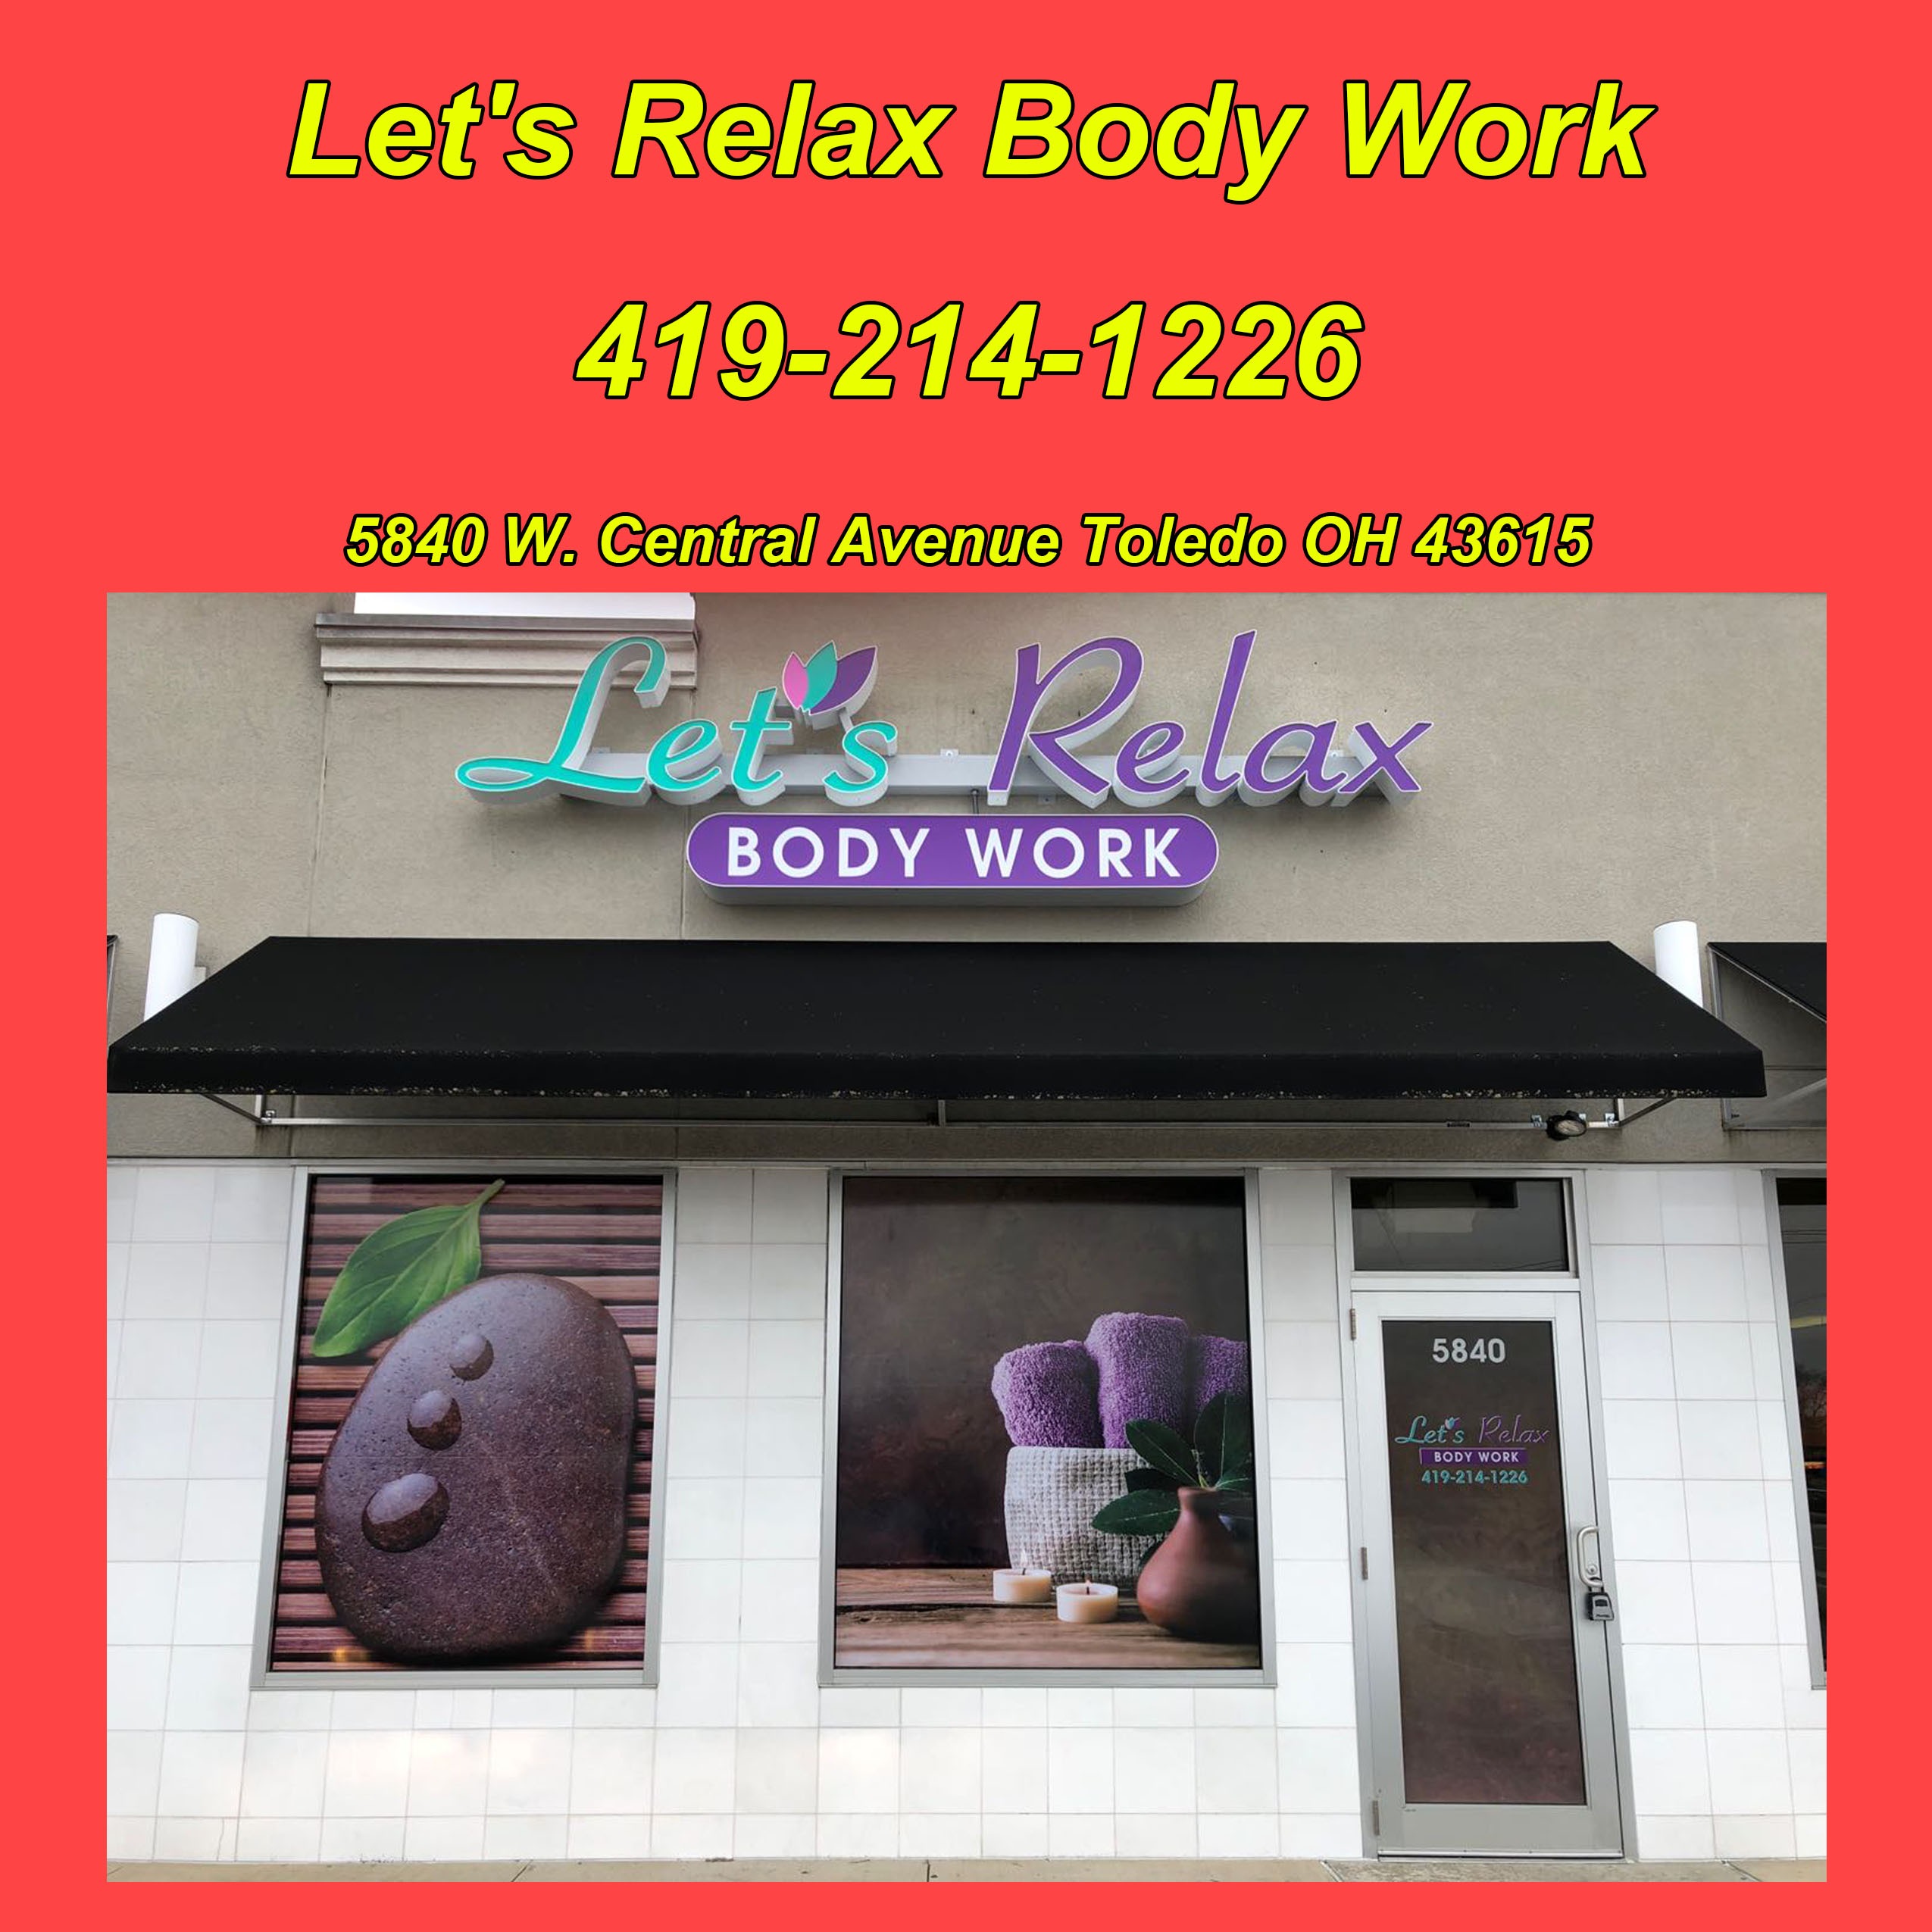 Let's Relax Body Work | Toledo OH Massage Spa Coupons near ...